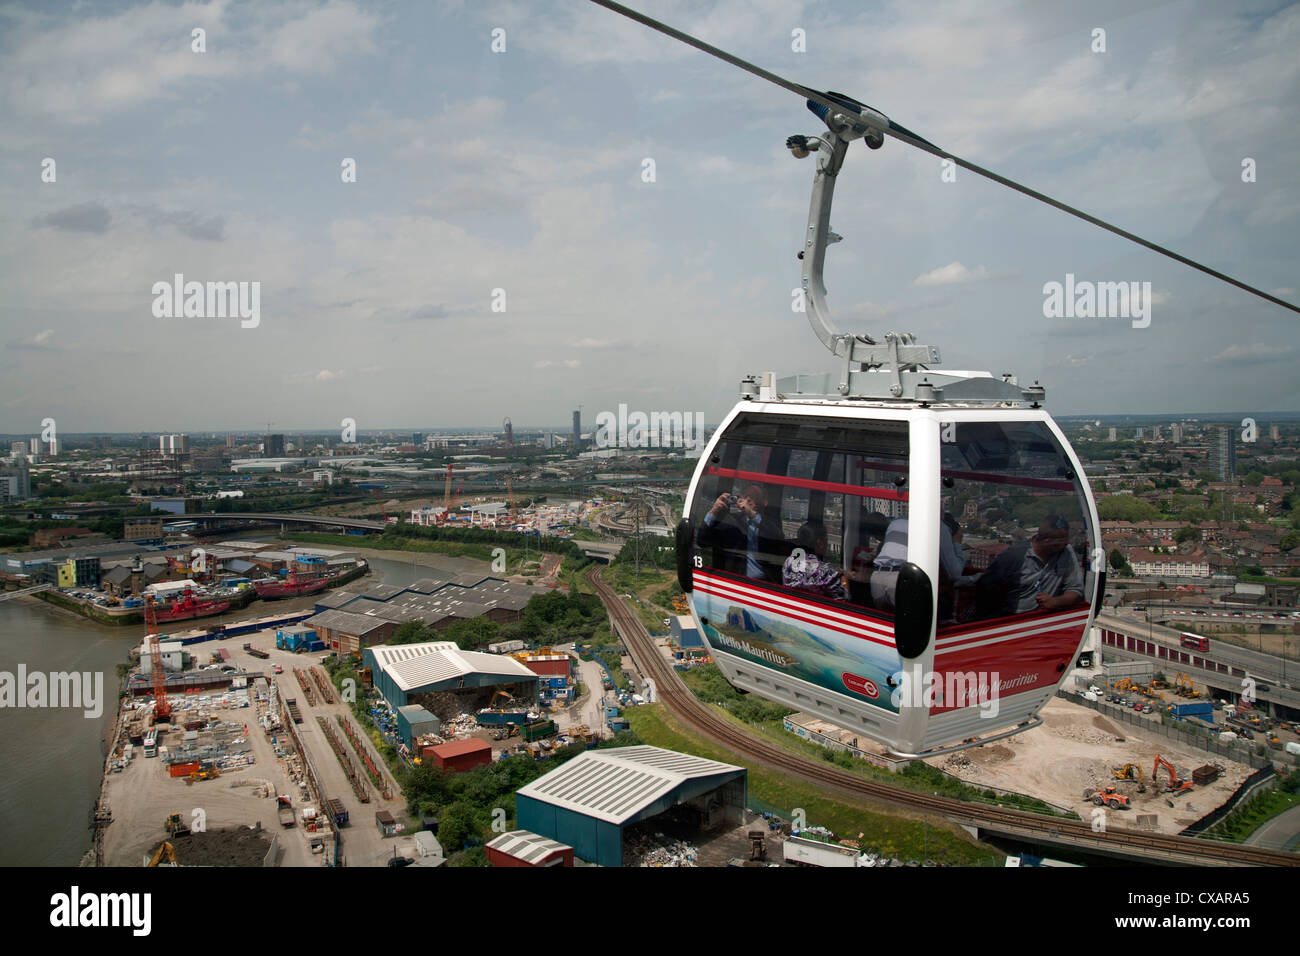 View from a cable car during the launch of the Emirates Air Line, London, England, United Kingdom, Europe Stock Photo